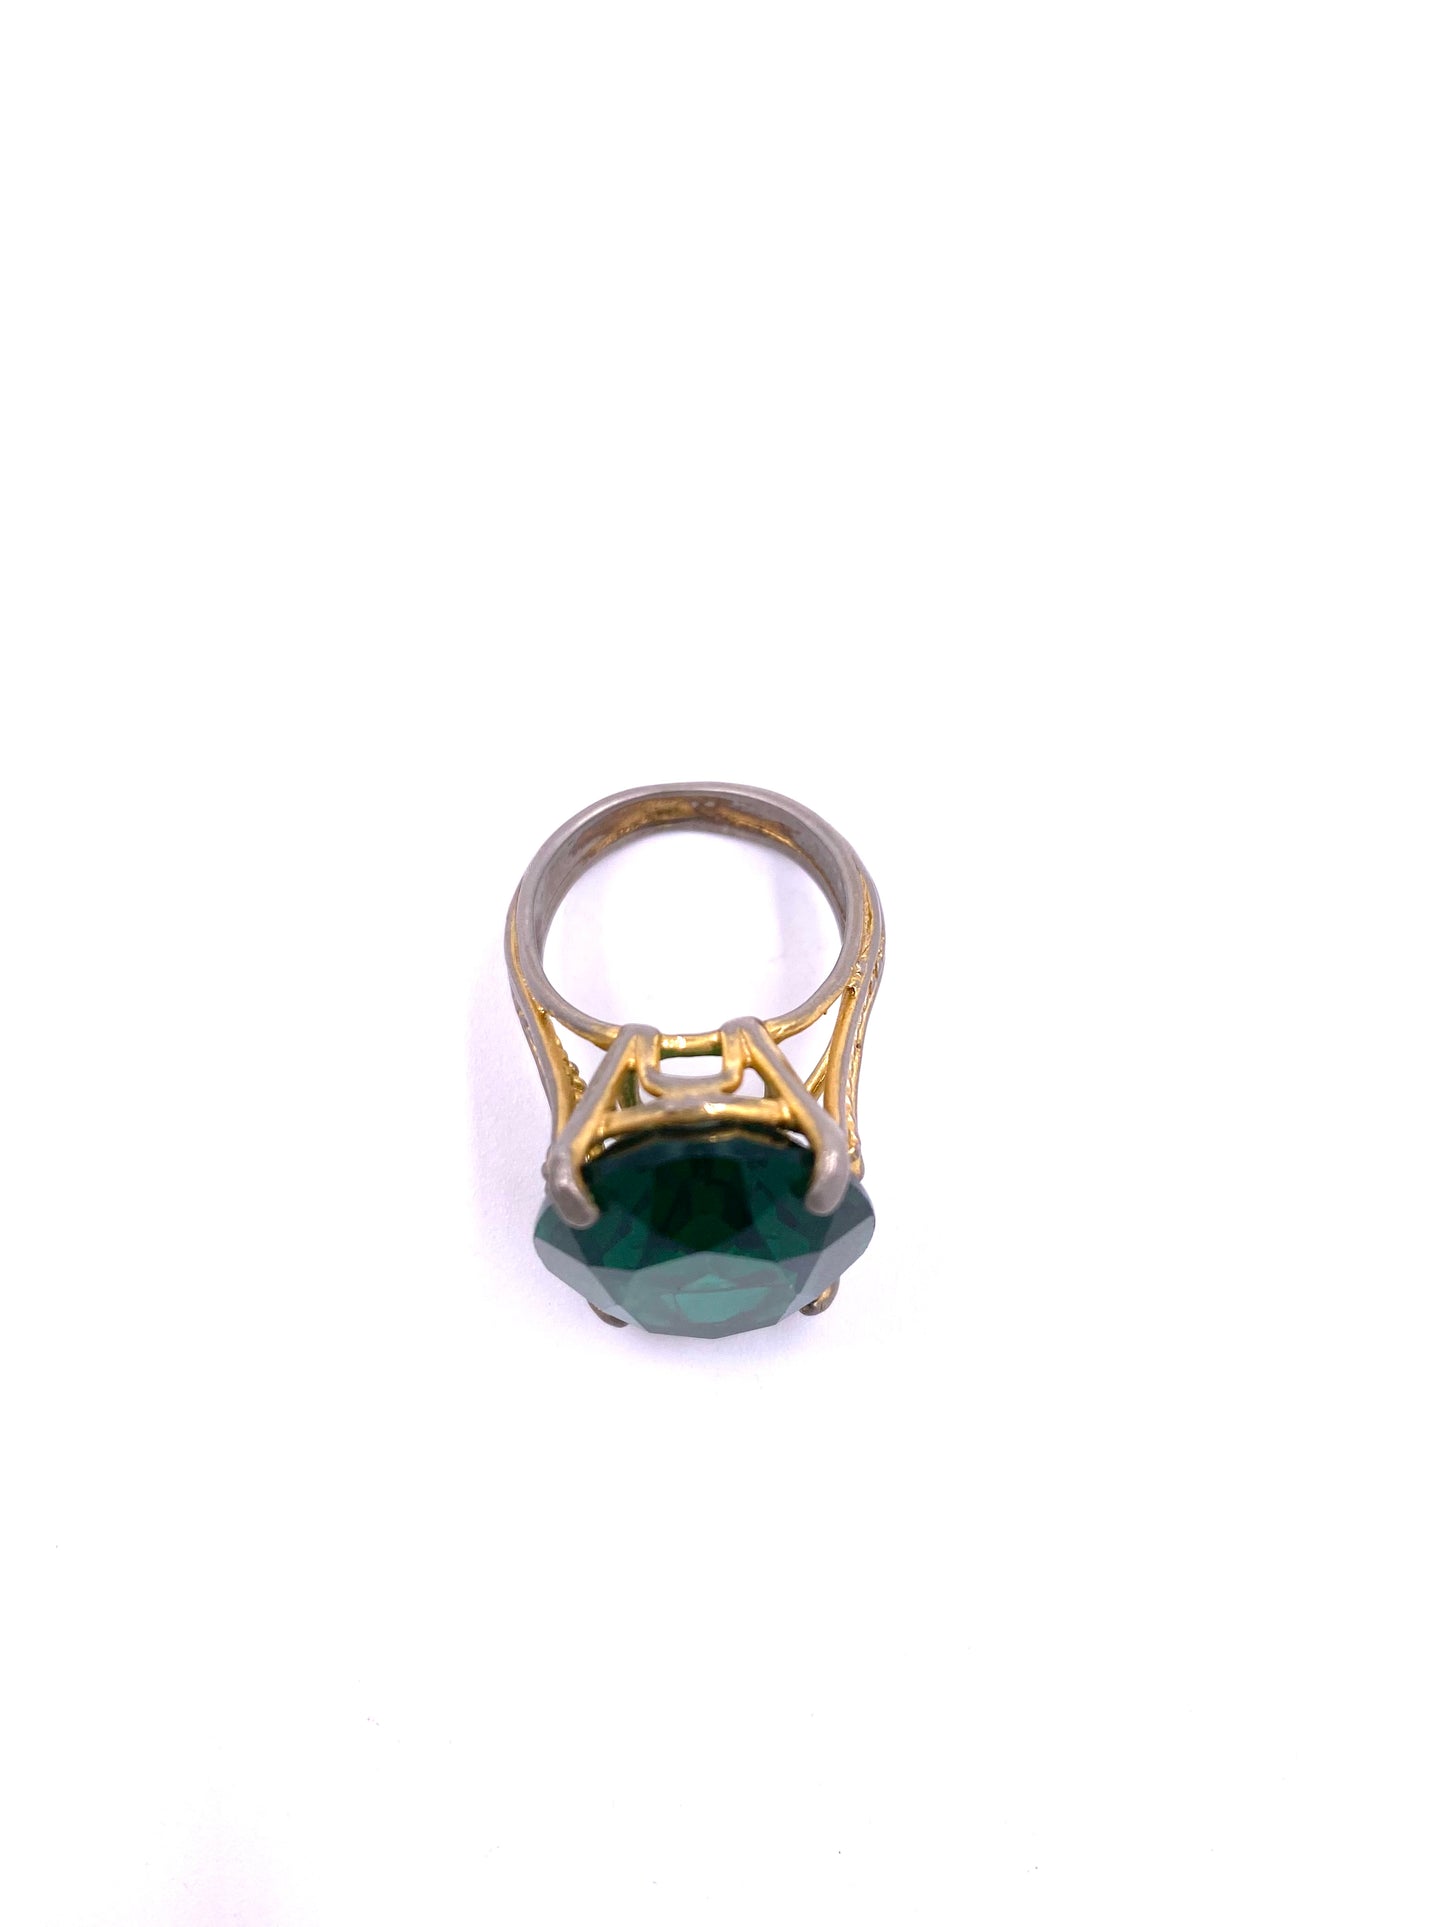 Emerald Oval Cocktail Ring